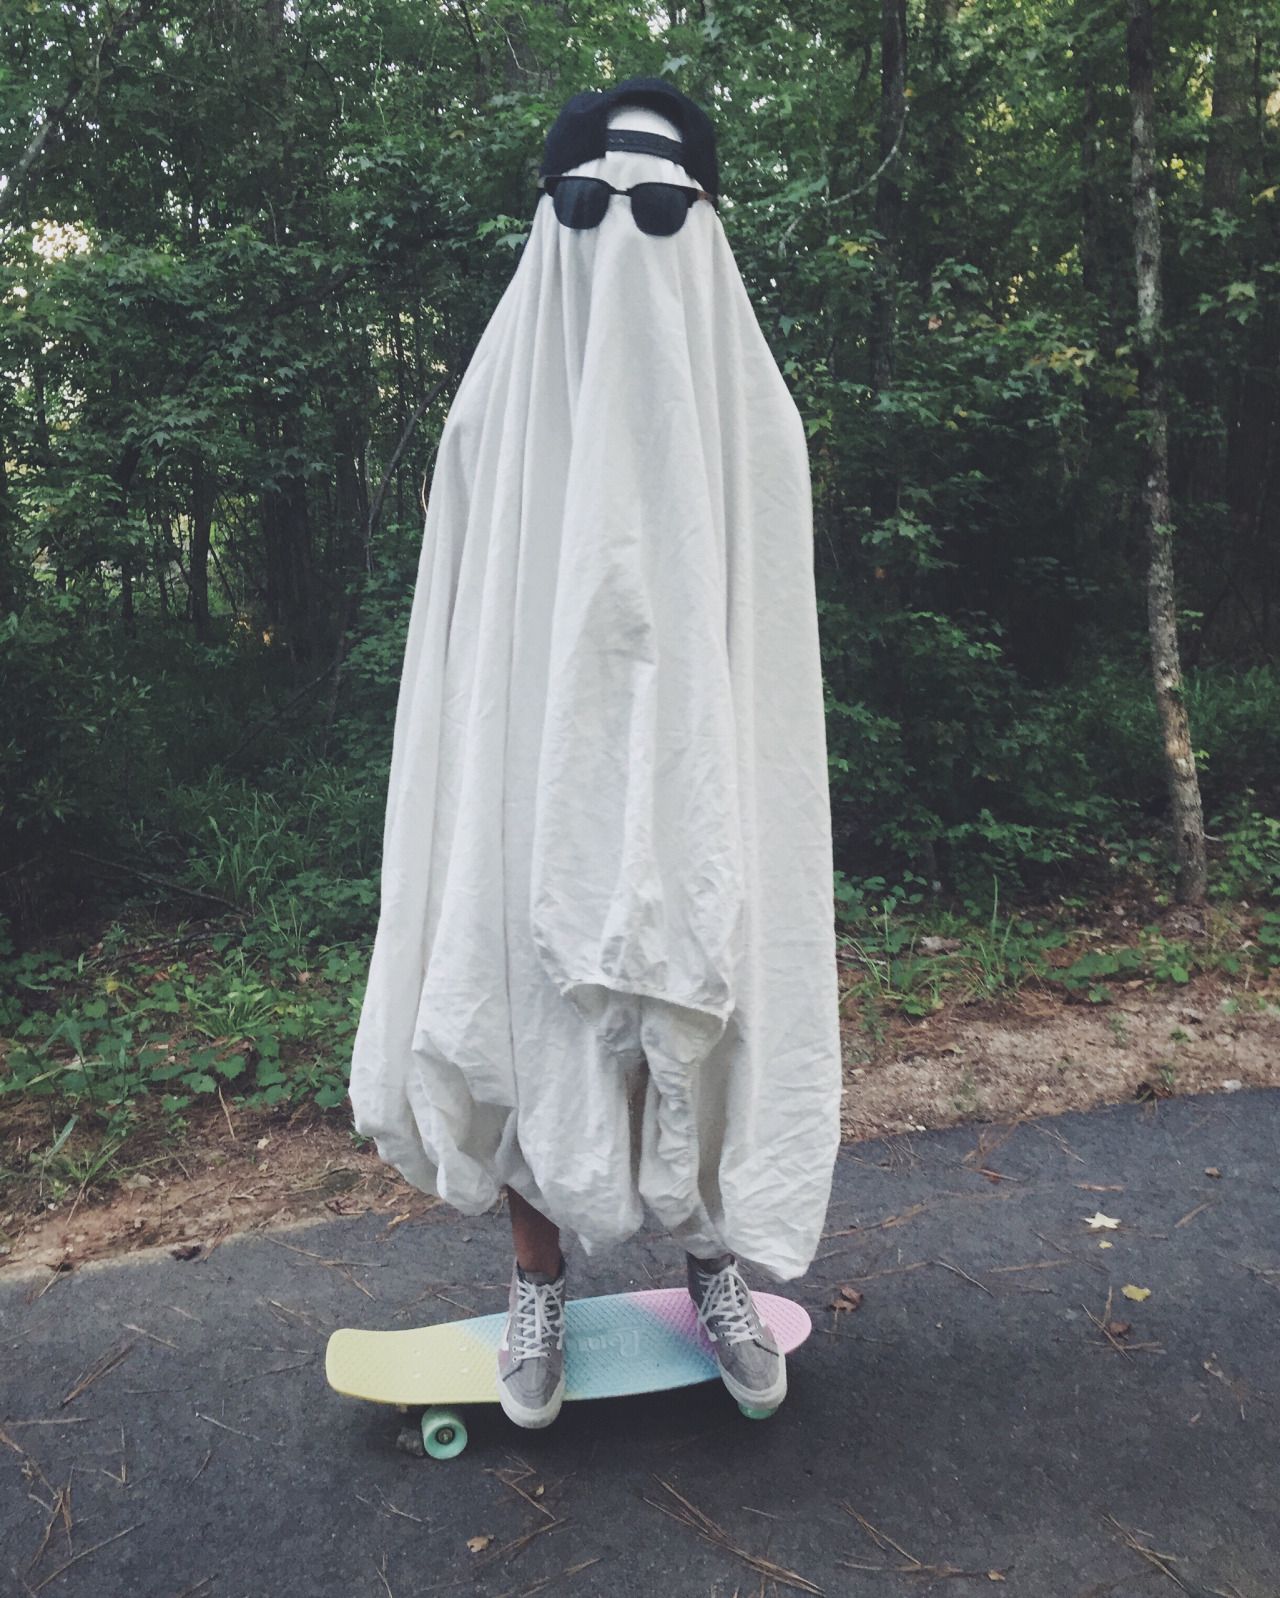 casualaffaire: “ Skateboarding ghost is back for the summer ...